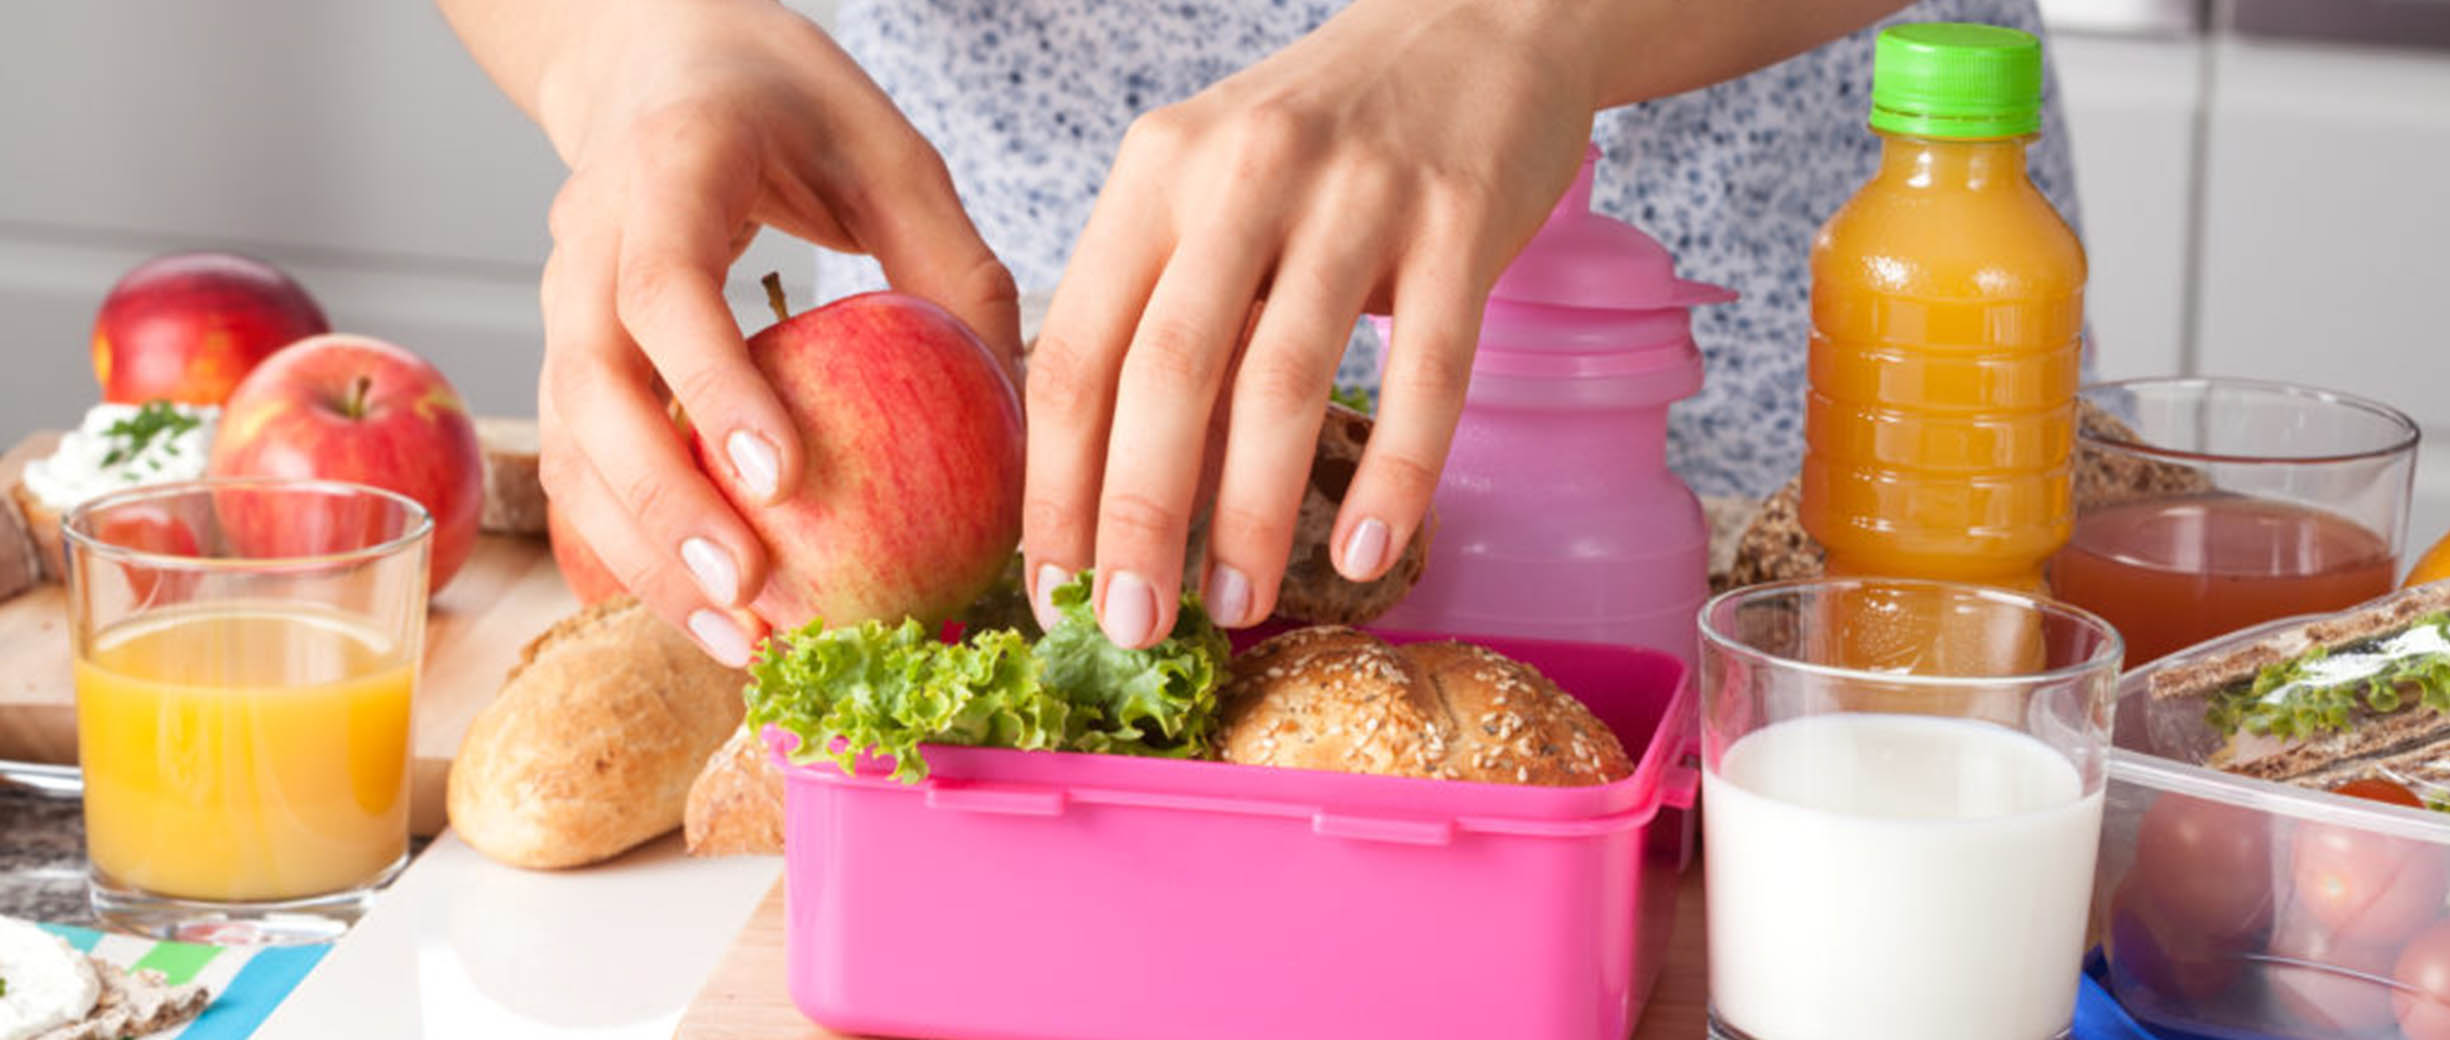 5 Steps to Making Lunches for the Whole Week in 30 Minutes or Less